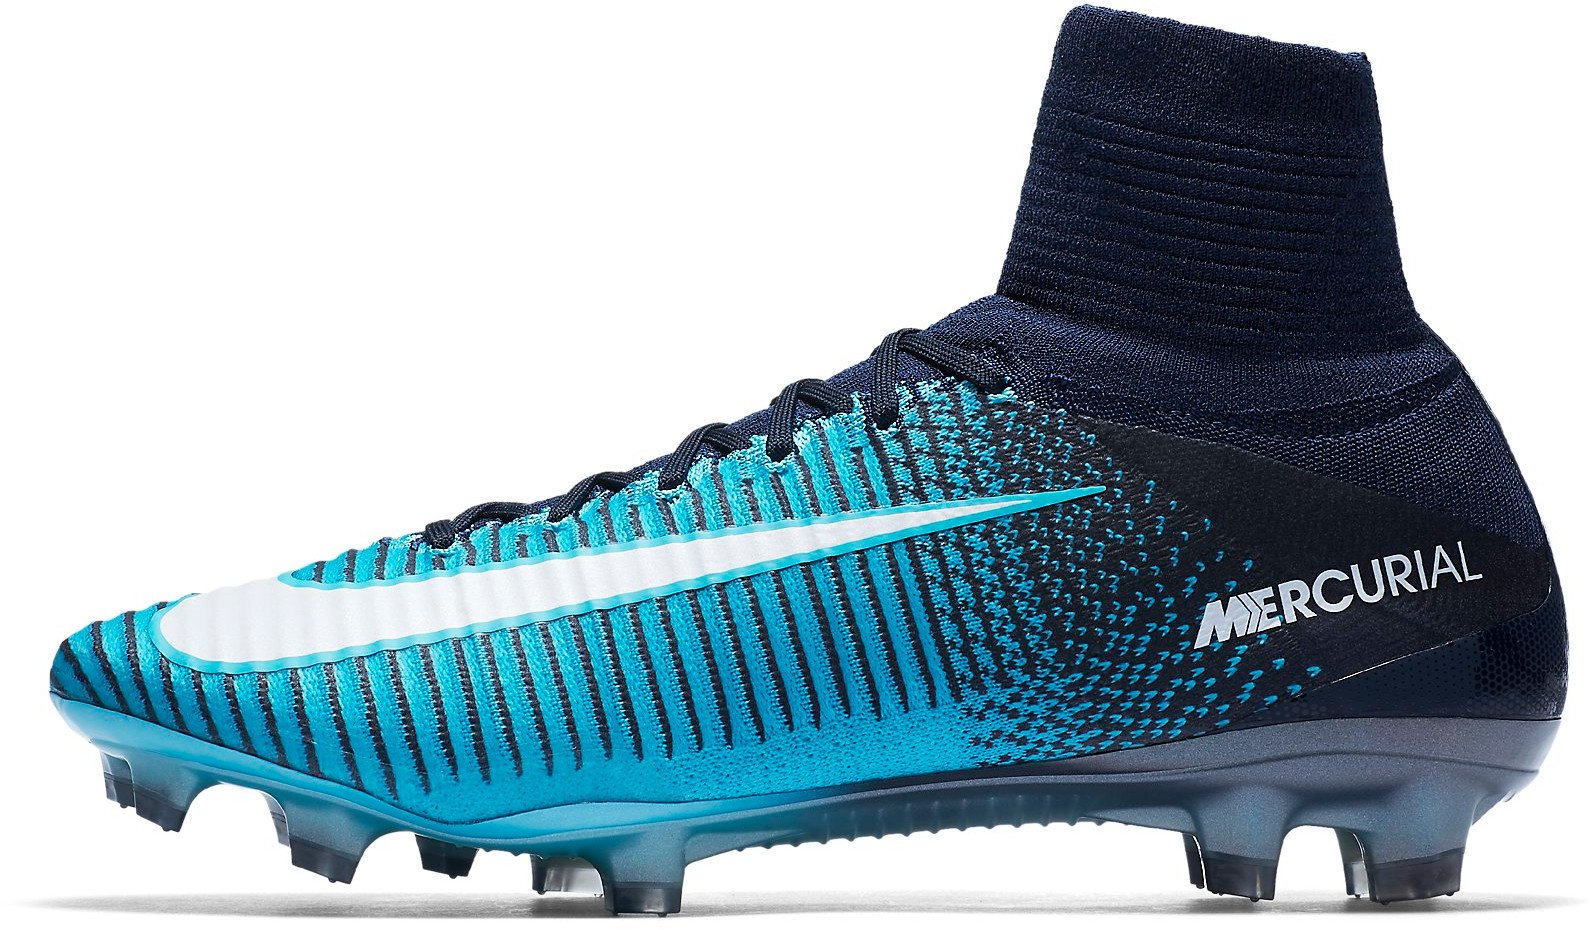 Football shoes Nike MERCURIAL SUPERFLY 